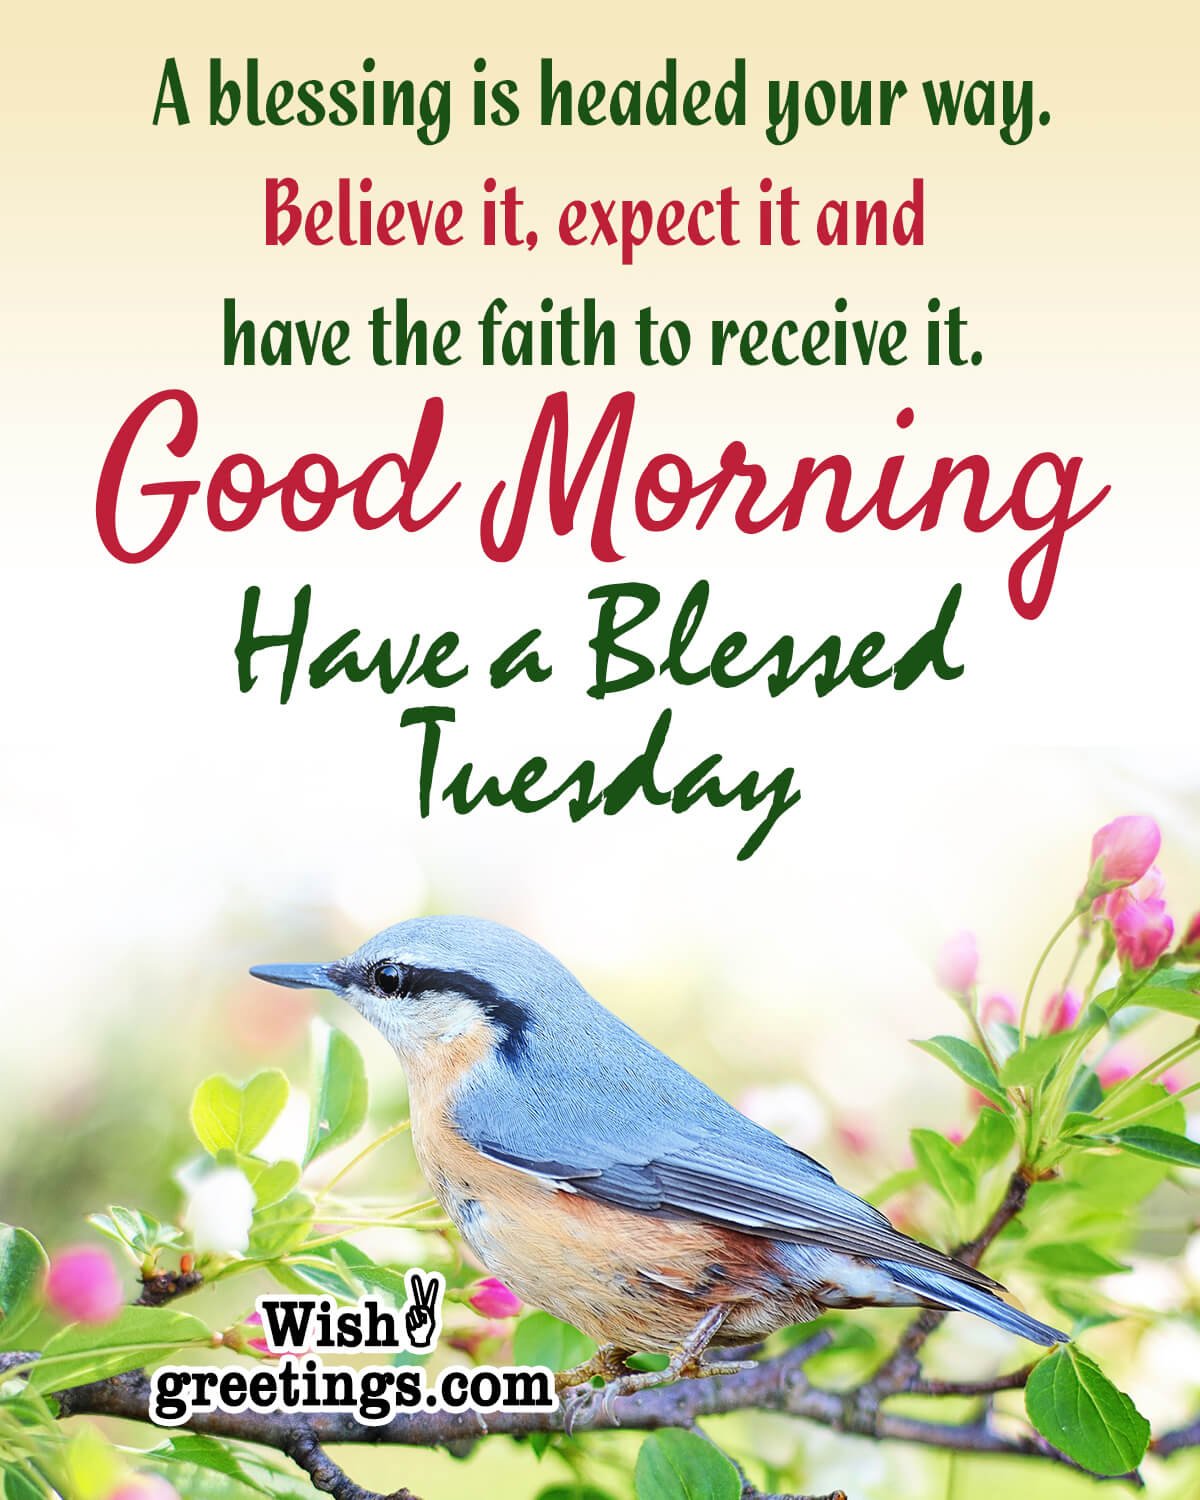 good morning tuesday quotes